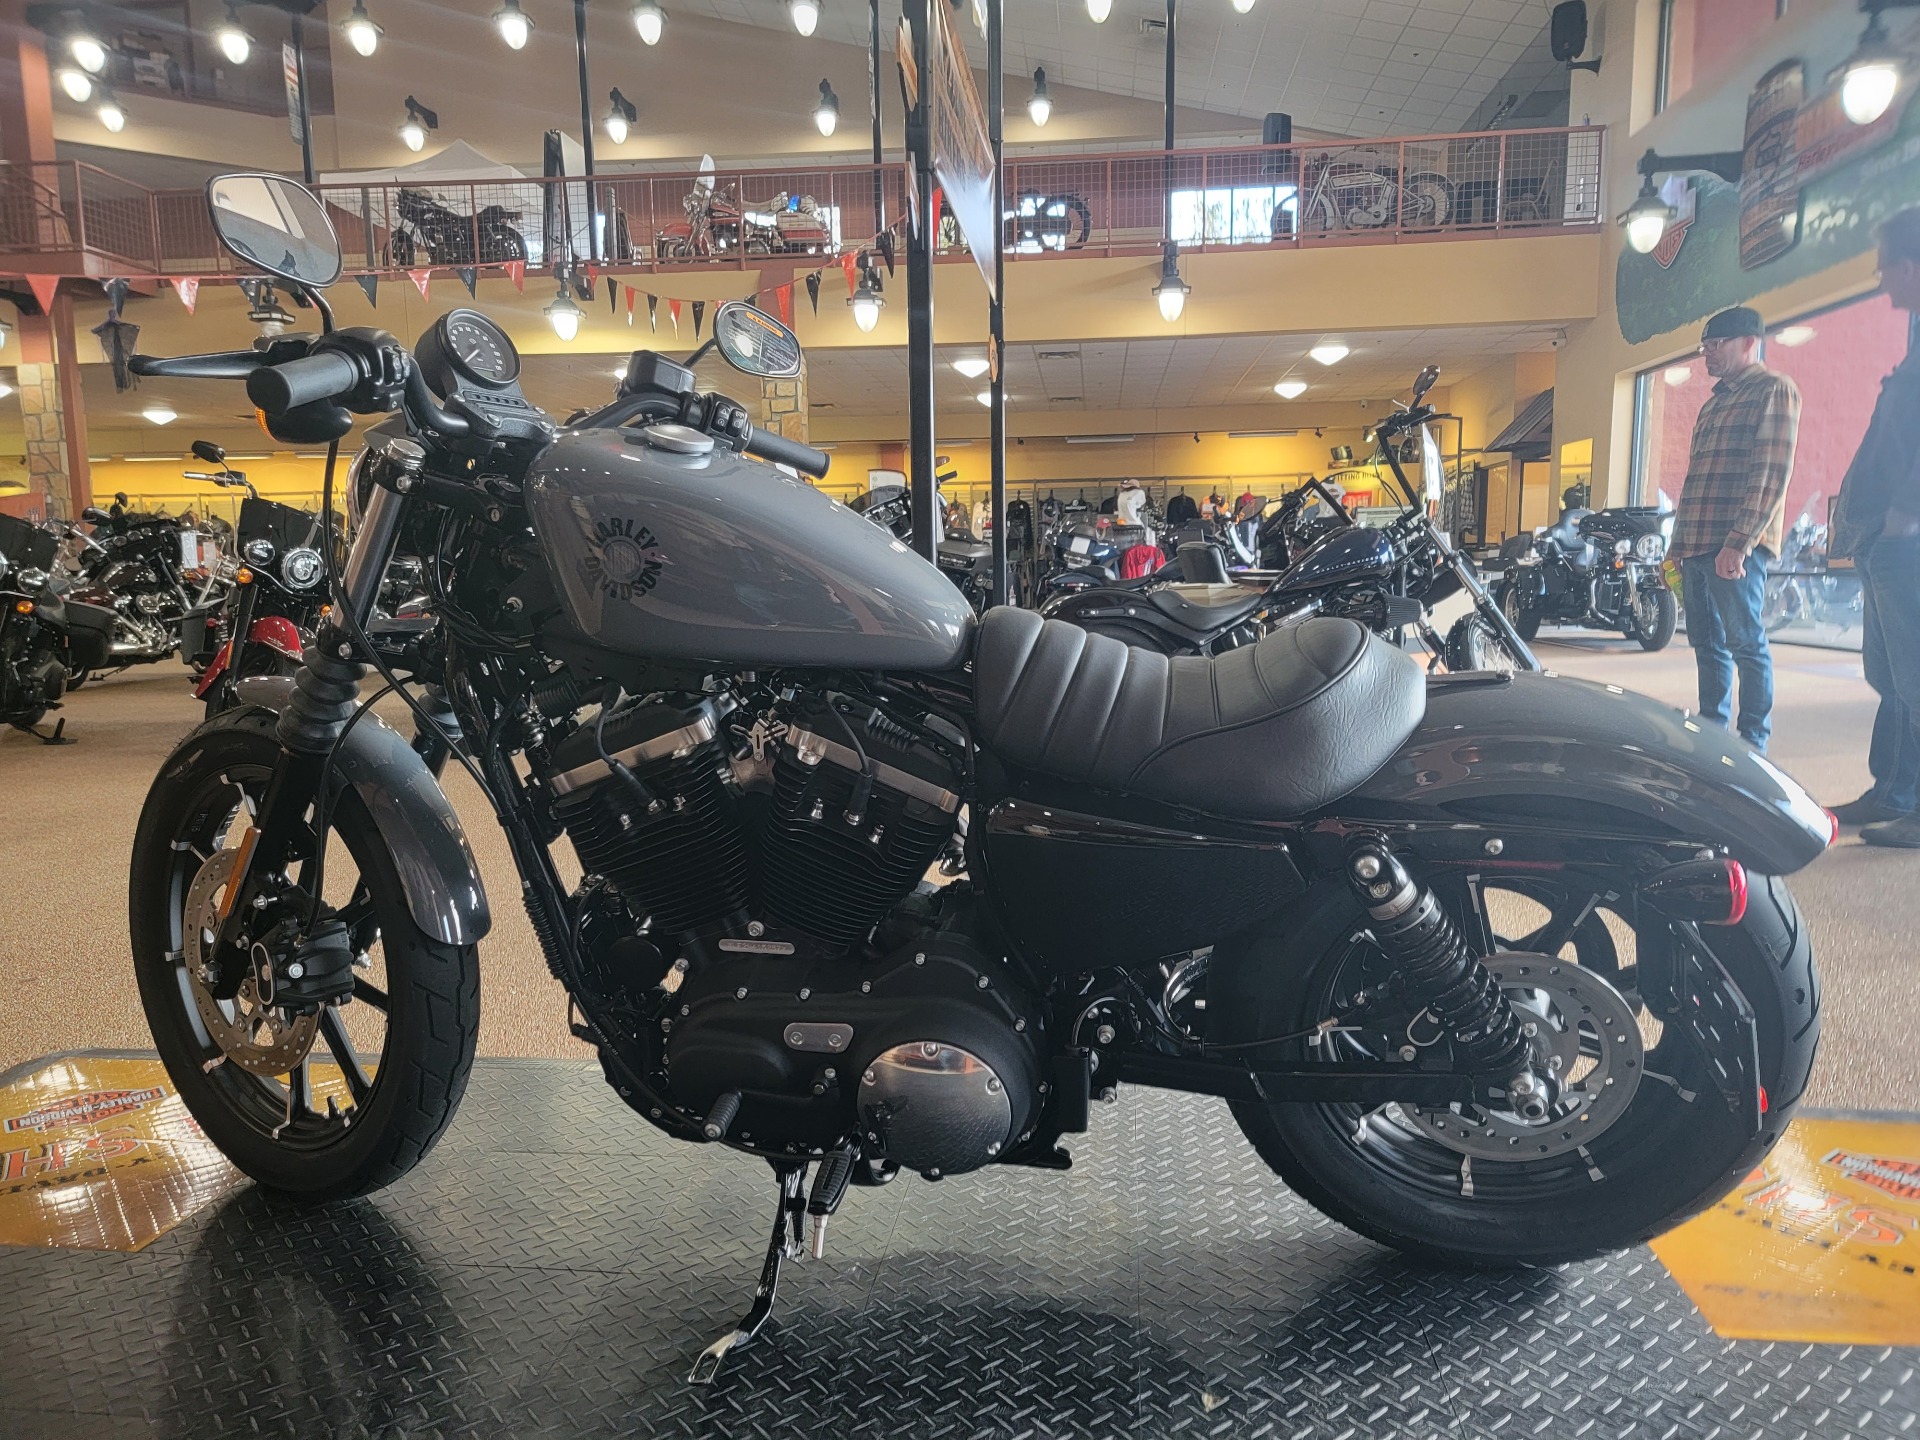 2022 Harley-Davidson Iron 883™ in Knoxville, Tennessee - Photo 4